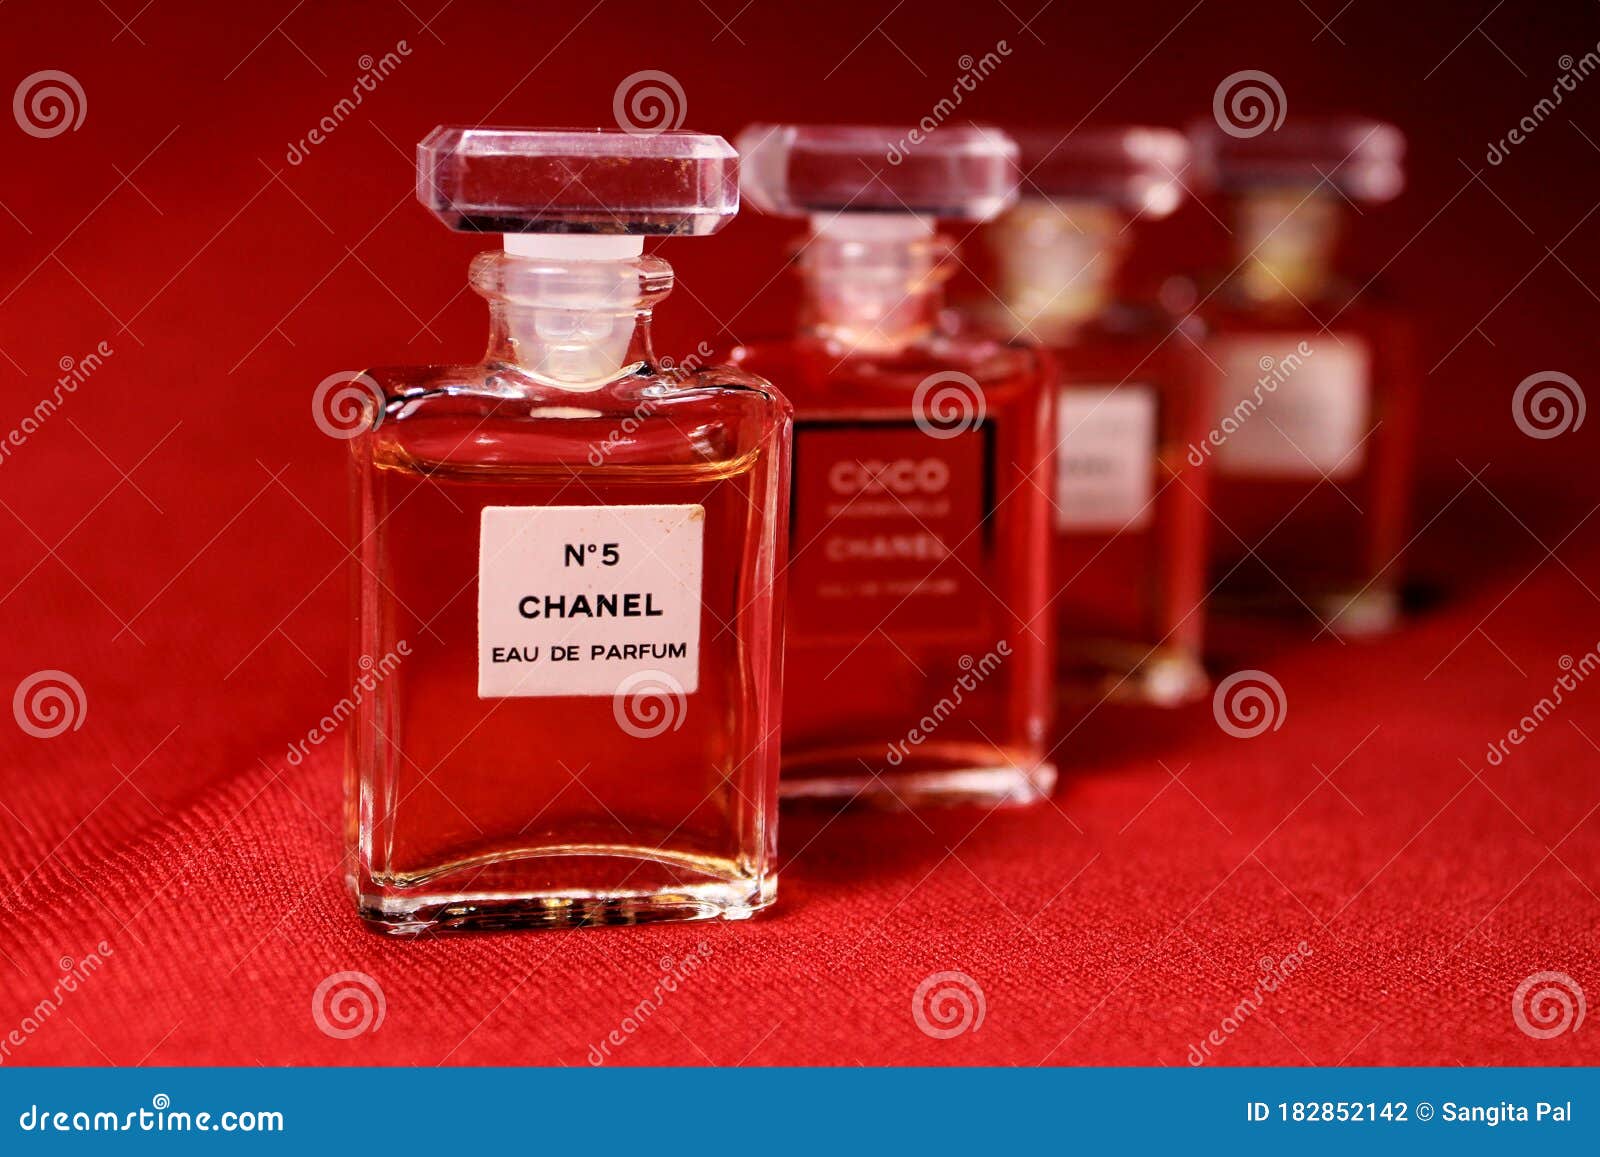 Chanel Perfume Bottles Isolated on Red Background. Bottles with ...